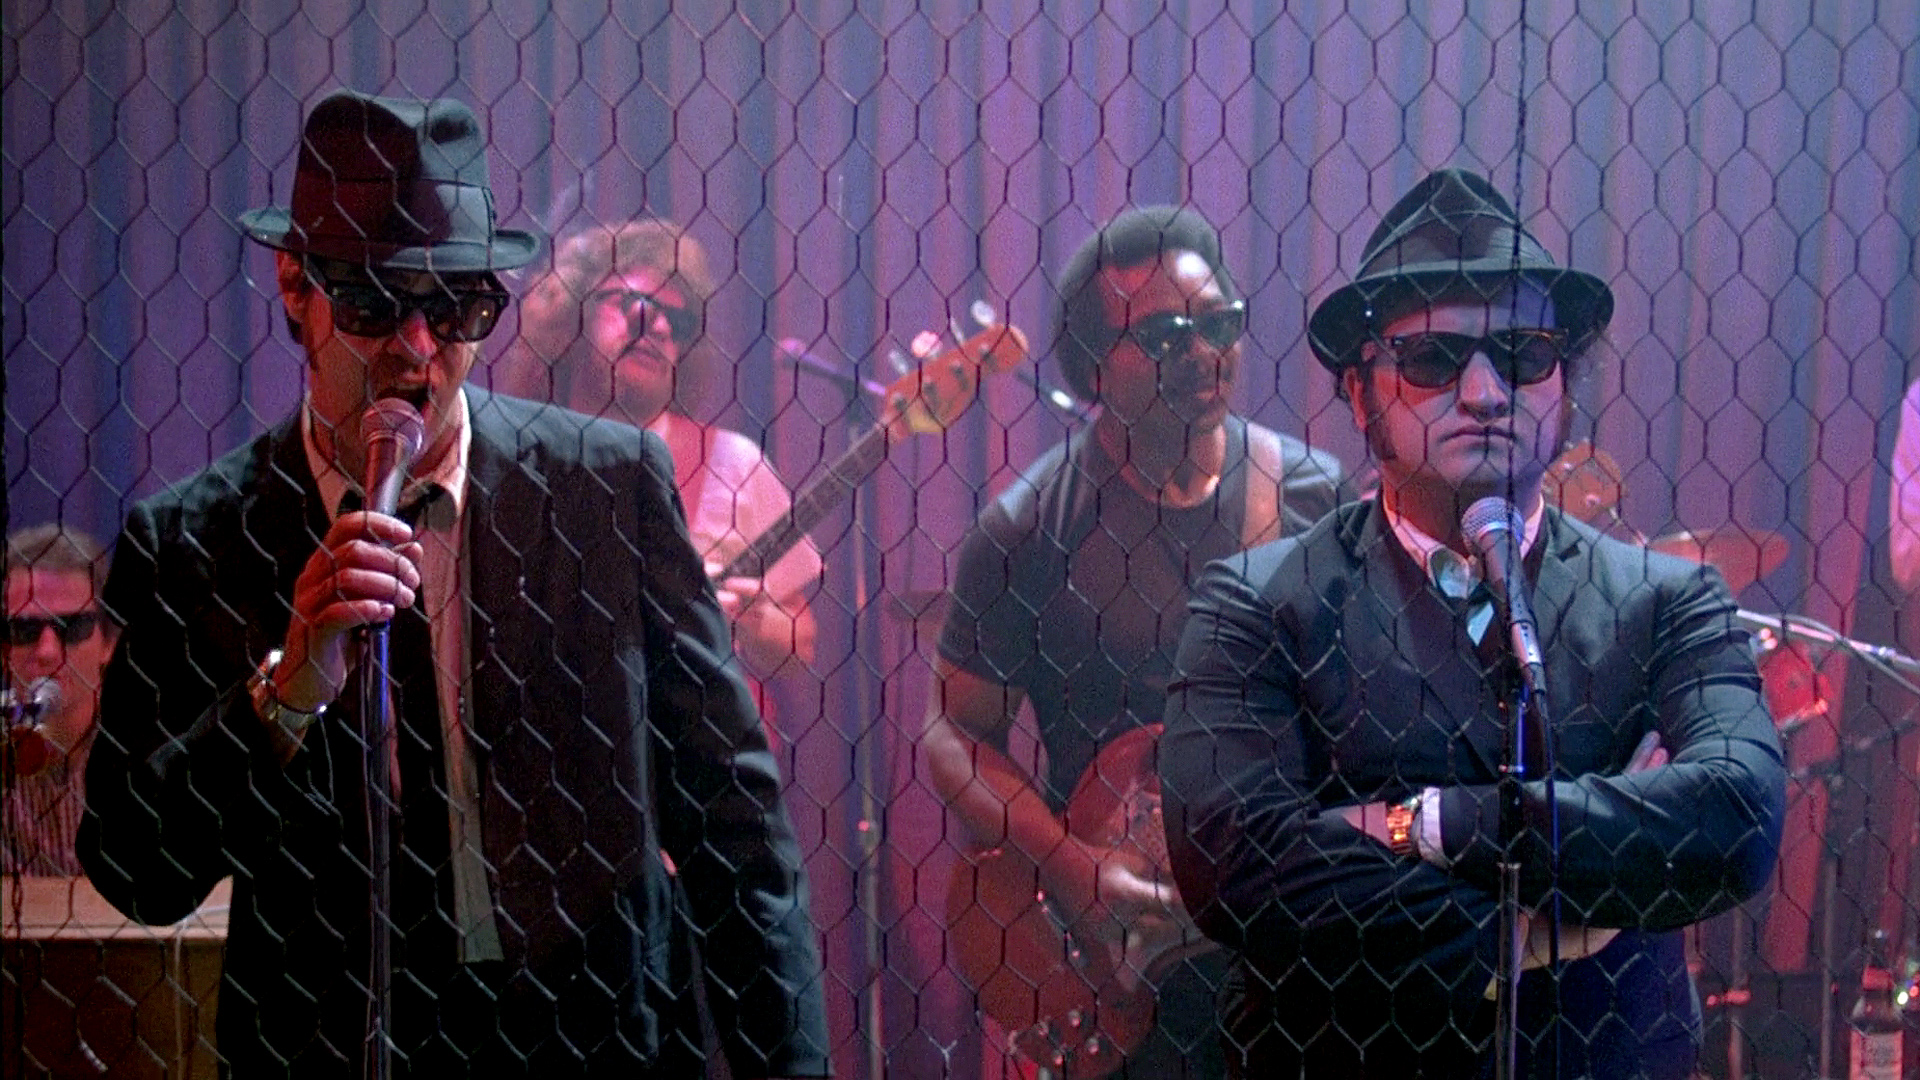 The Blues Brothers Images. 